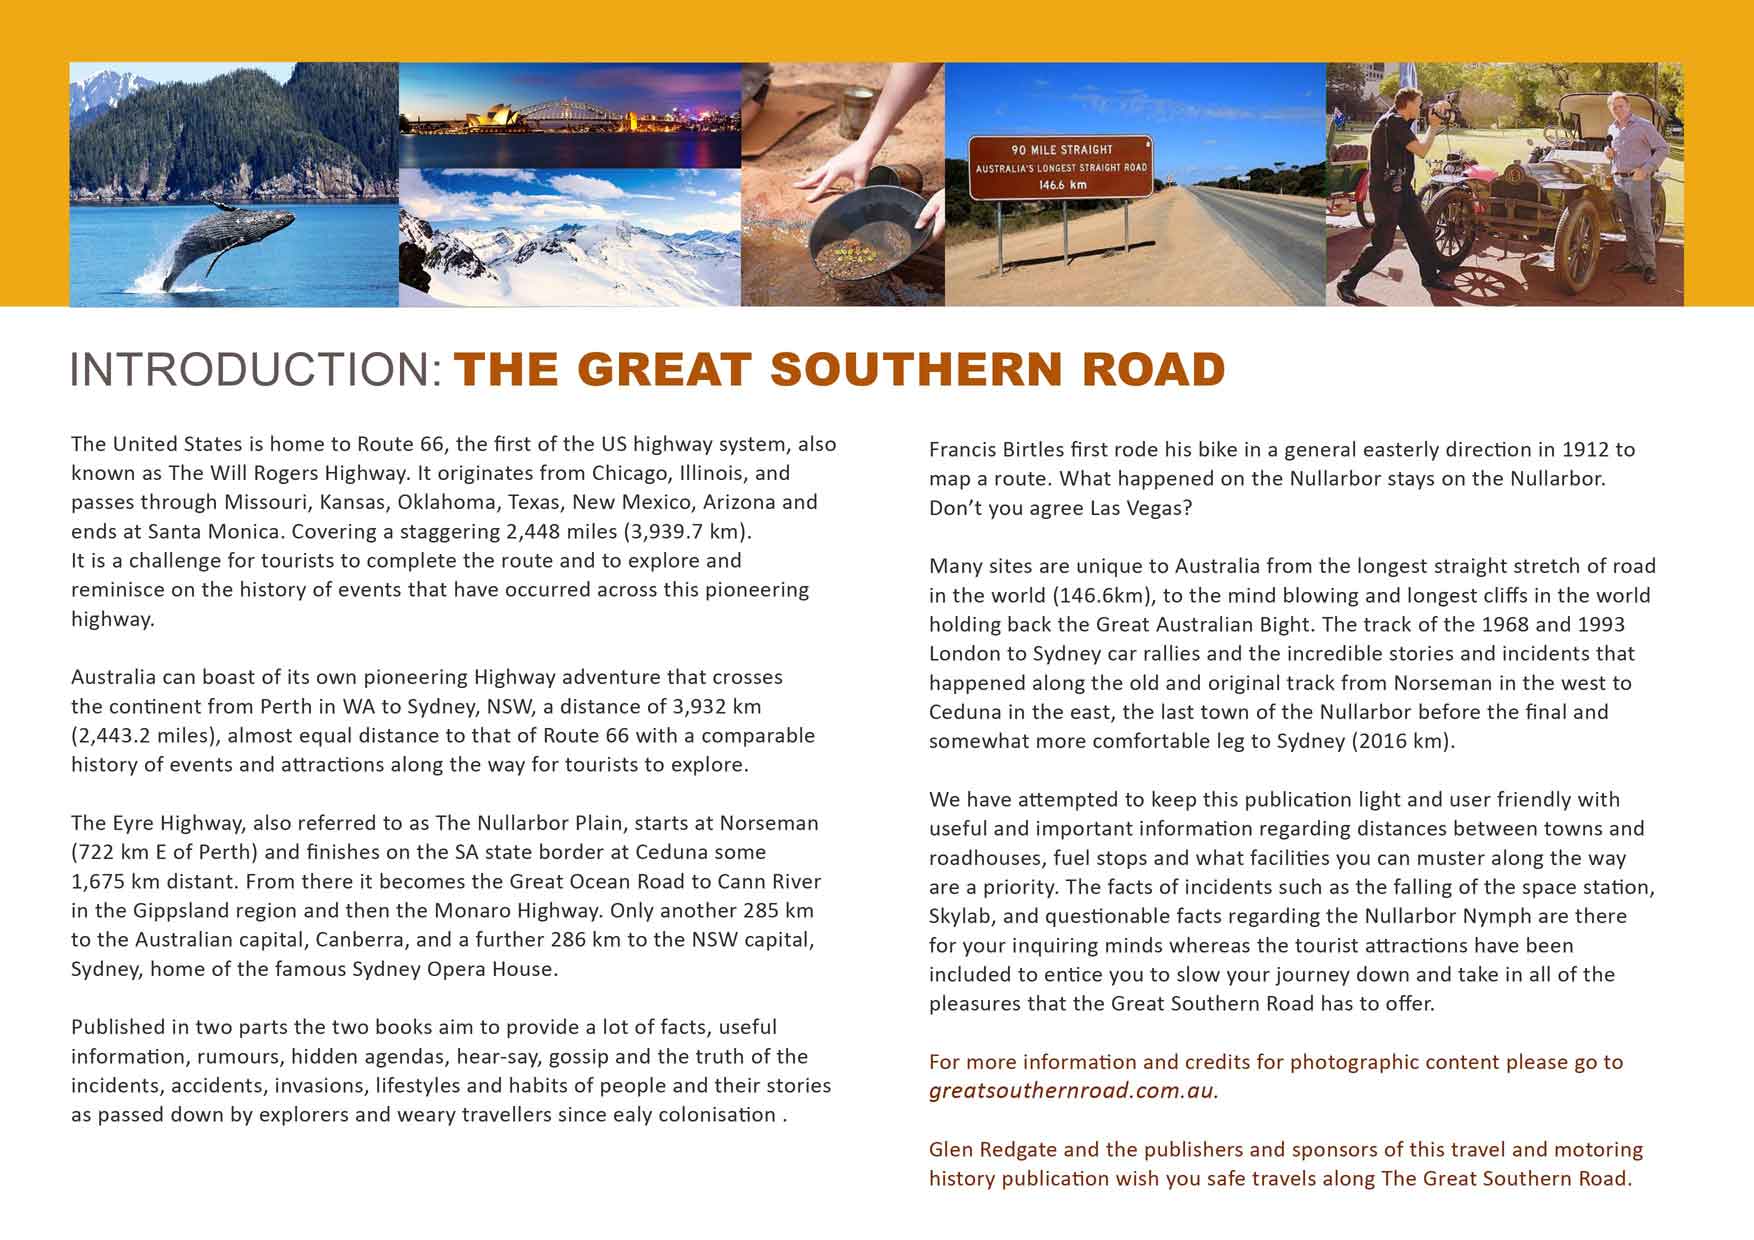 Great Southern Road - Introduction